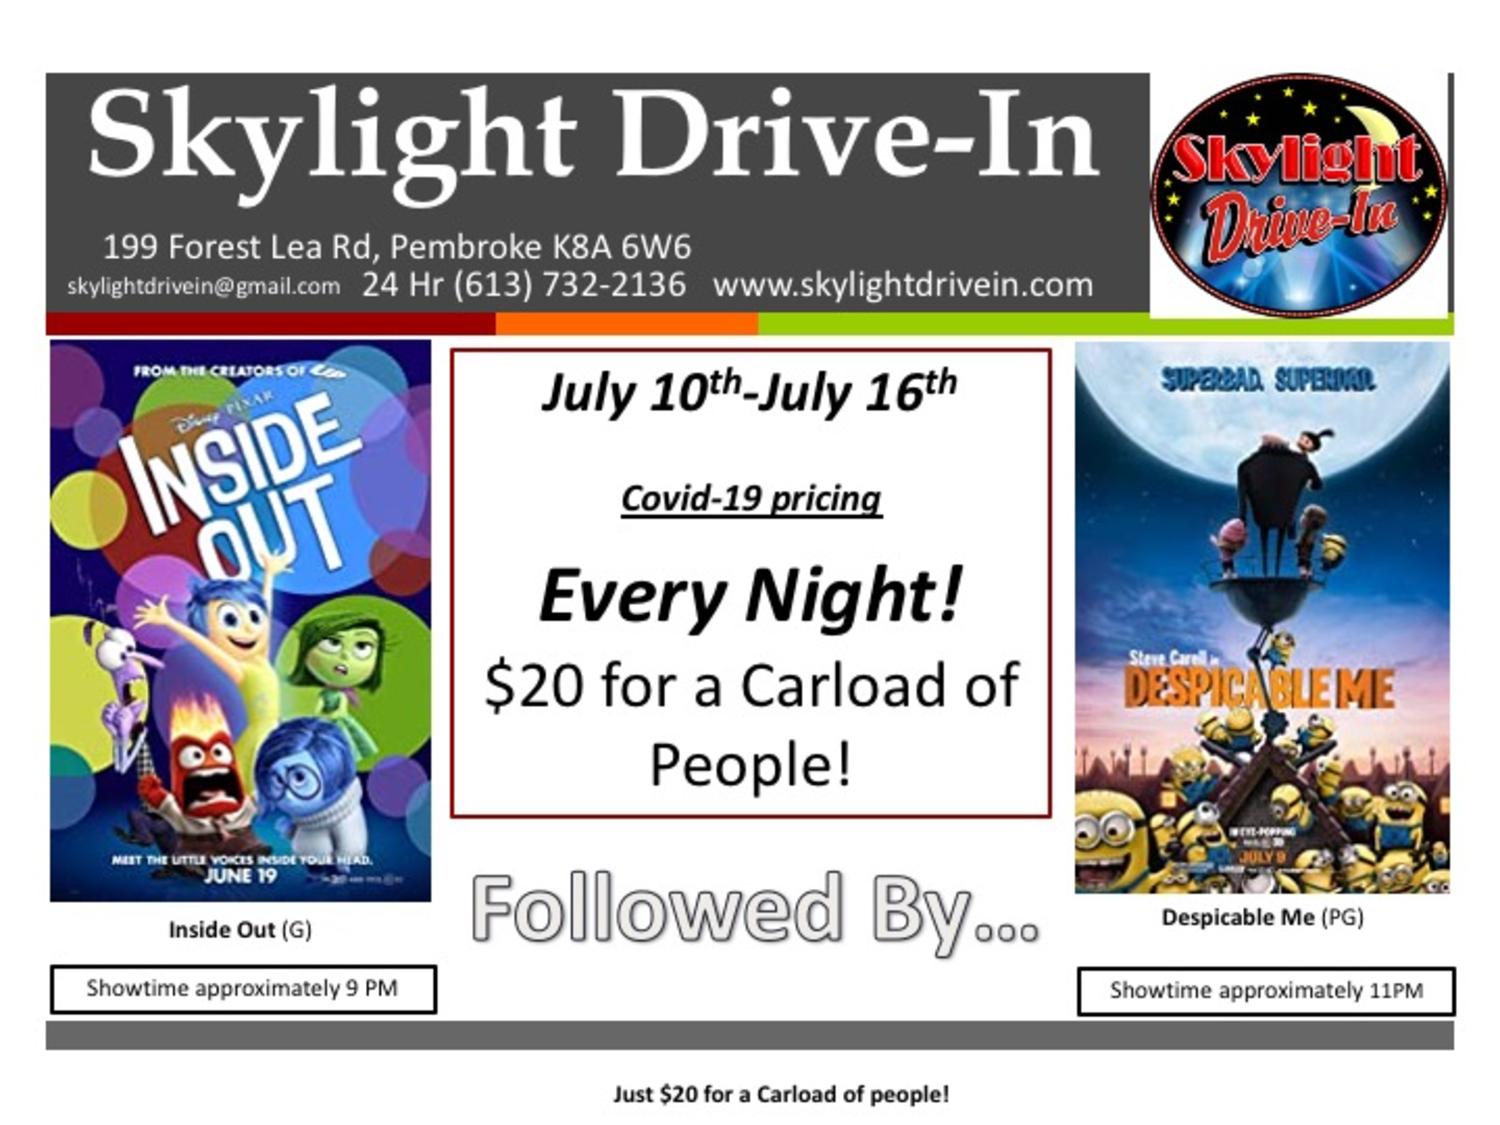 Skylight Drive-In featuring Inside Out followed by Despicable Me